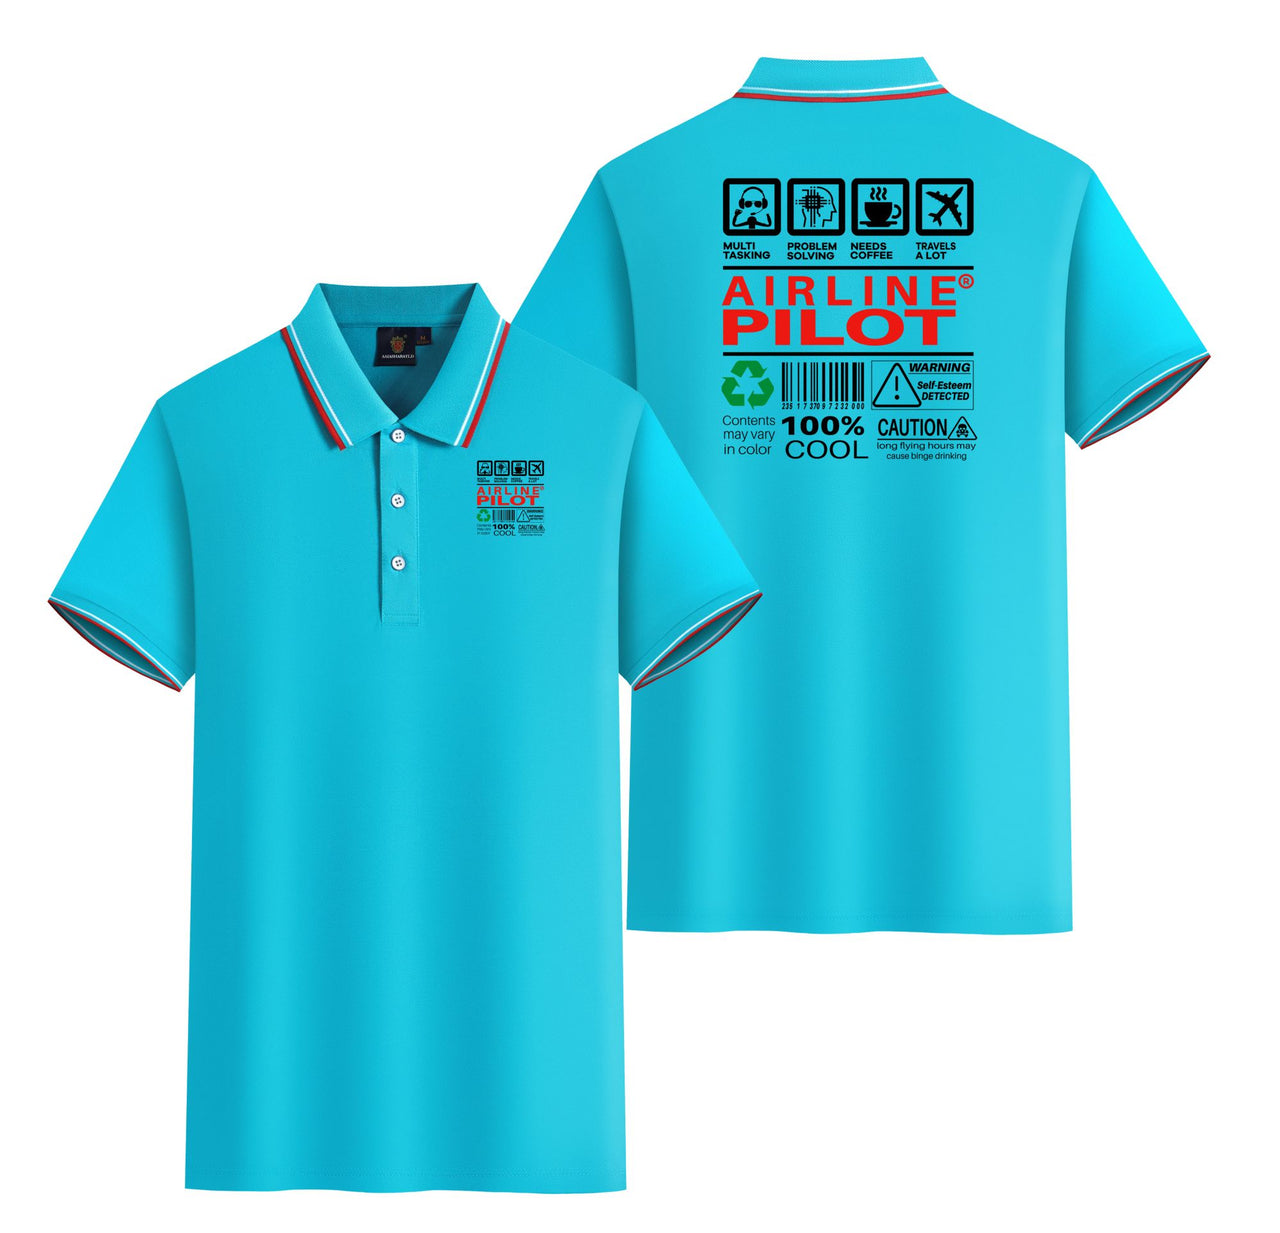 Airline Pilot Label Designed Stylish Polo T-Shirts (Double-Side)